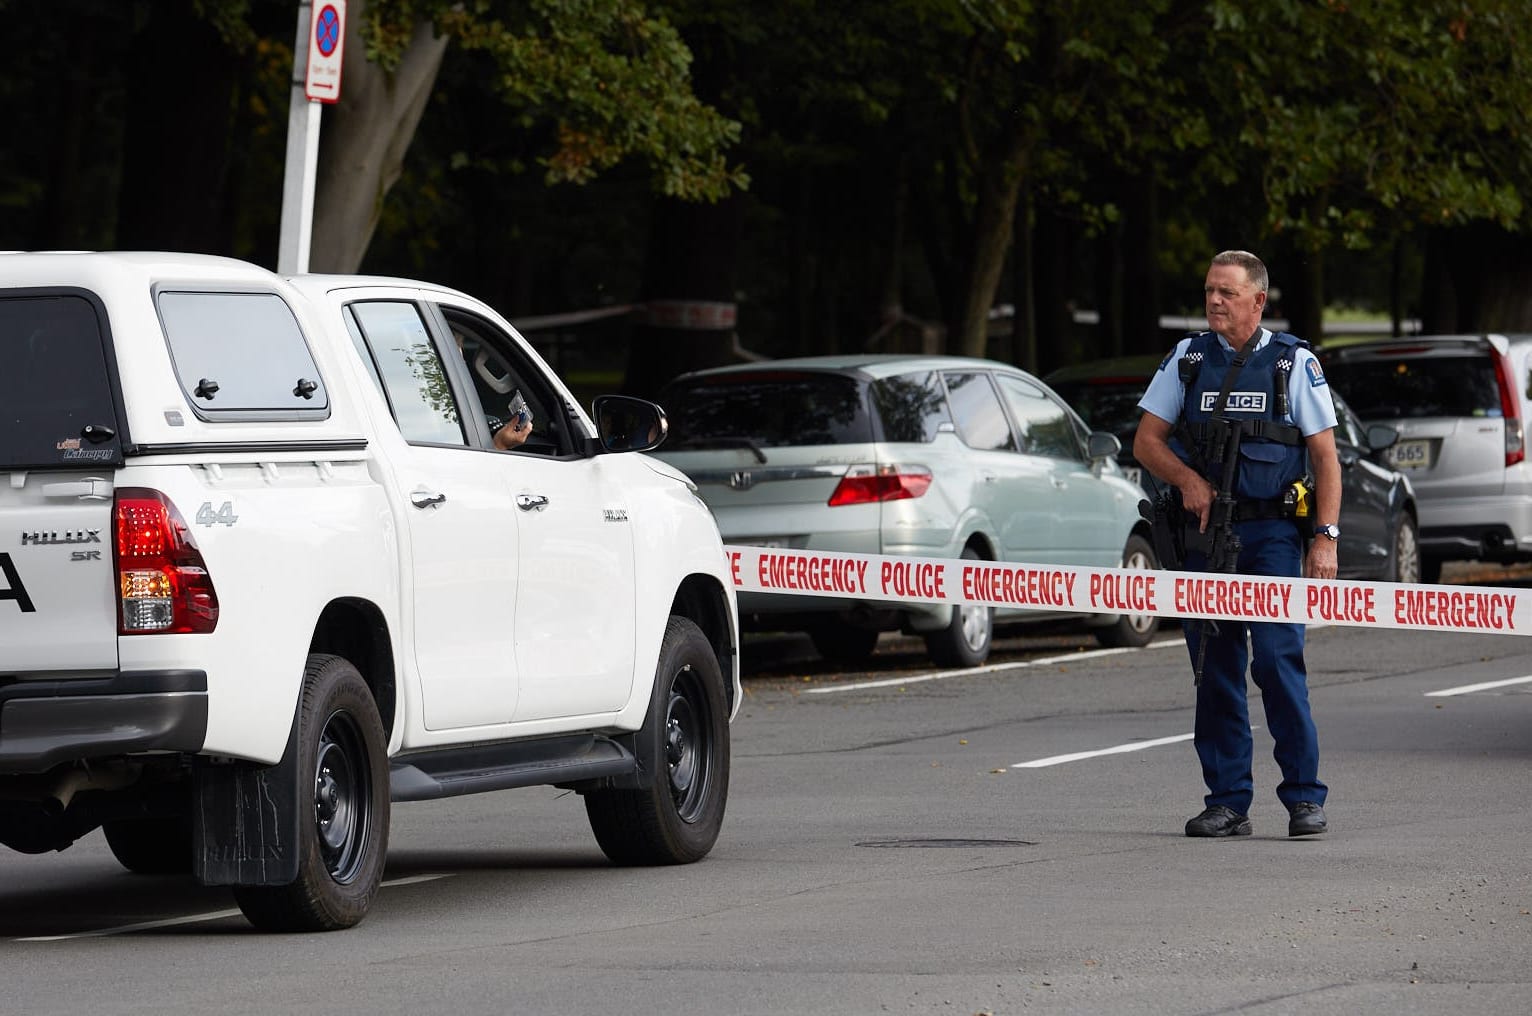 Police officers cordon off the area after gunmen attacked the two mosques and fired multiple times during Friday prayers in Christchurch.